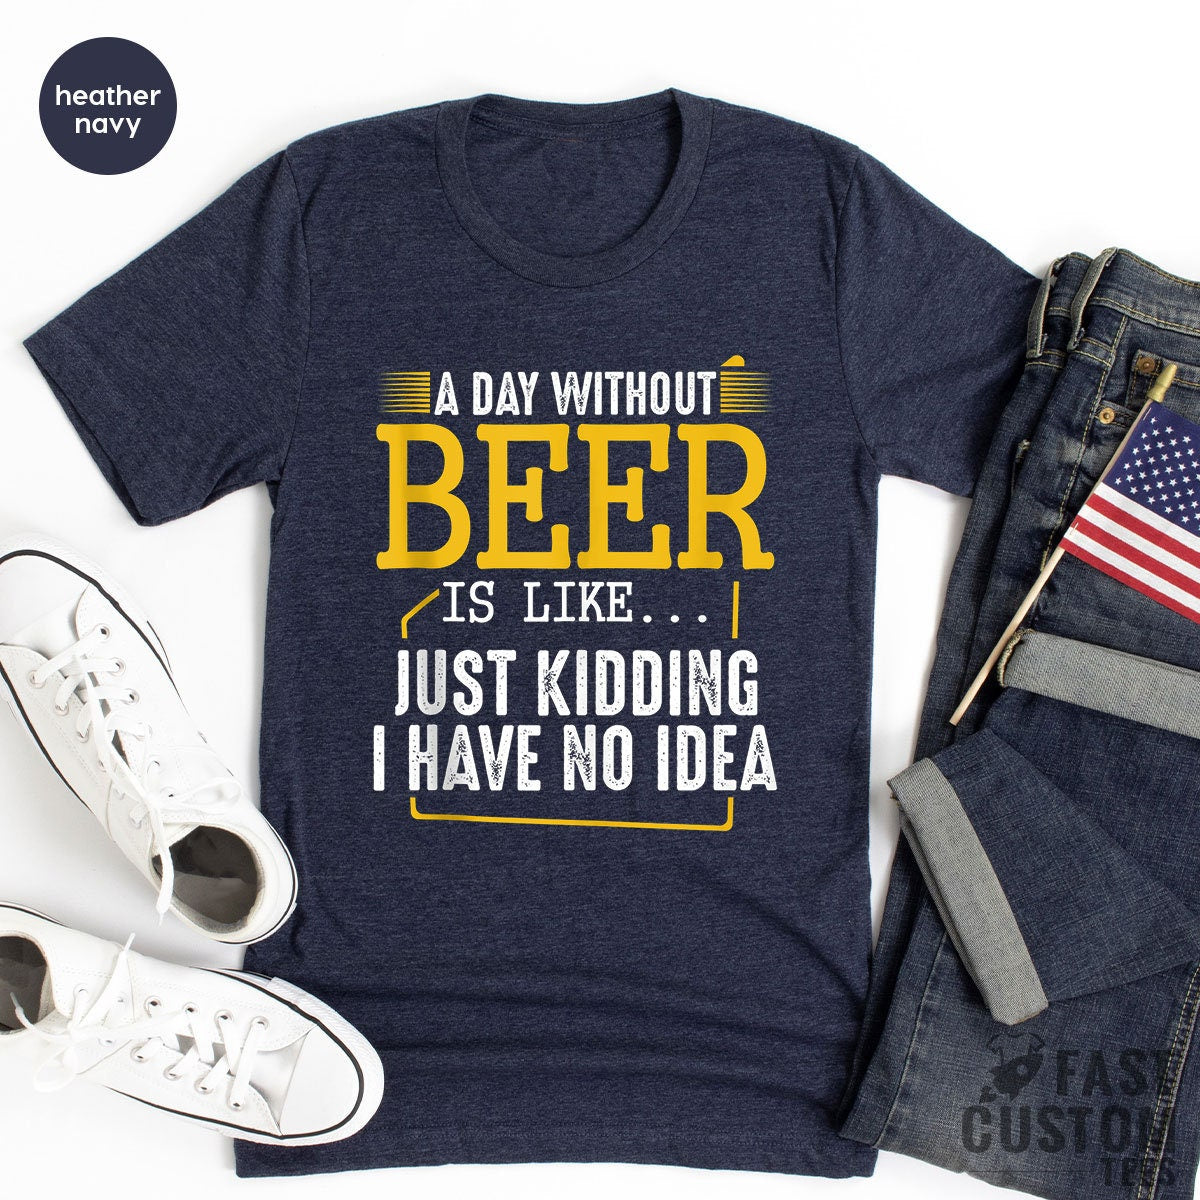 Funny Beer Shirt, A Day Without Beer Is Like Just Kidding I Have No Idea, Drinking Beer T-Shirt, Alcohol TShirt, Beer Lover, Funny Alcoholic - Fastdeliverytees.com